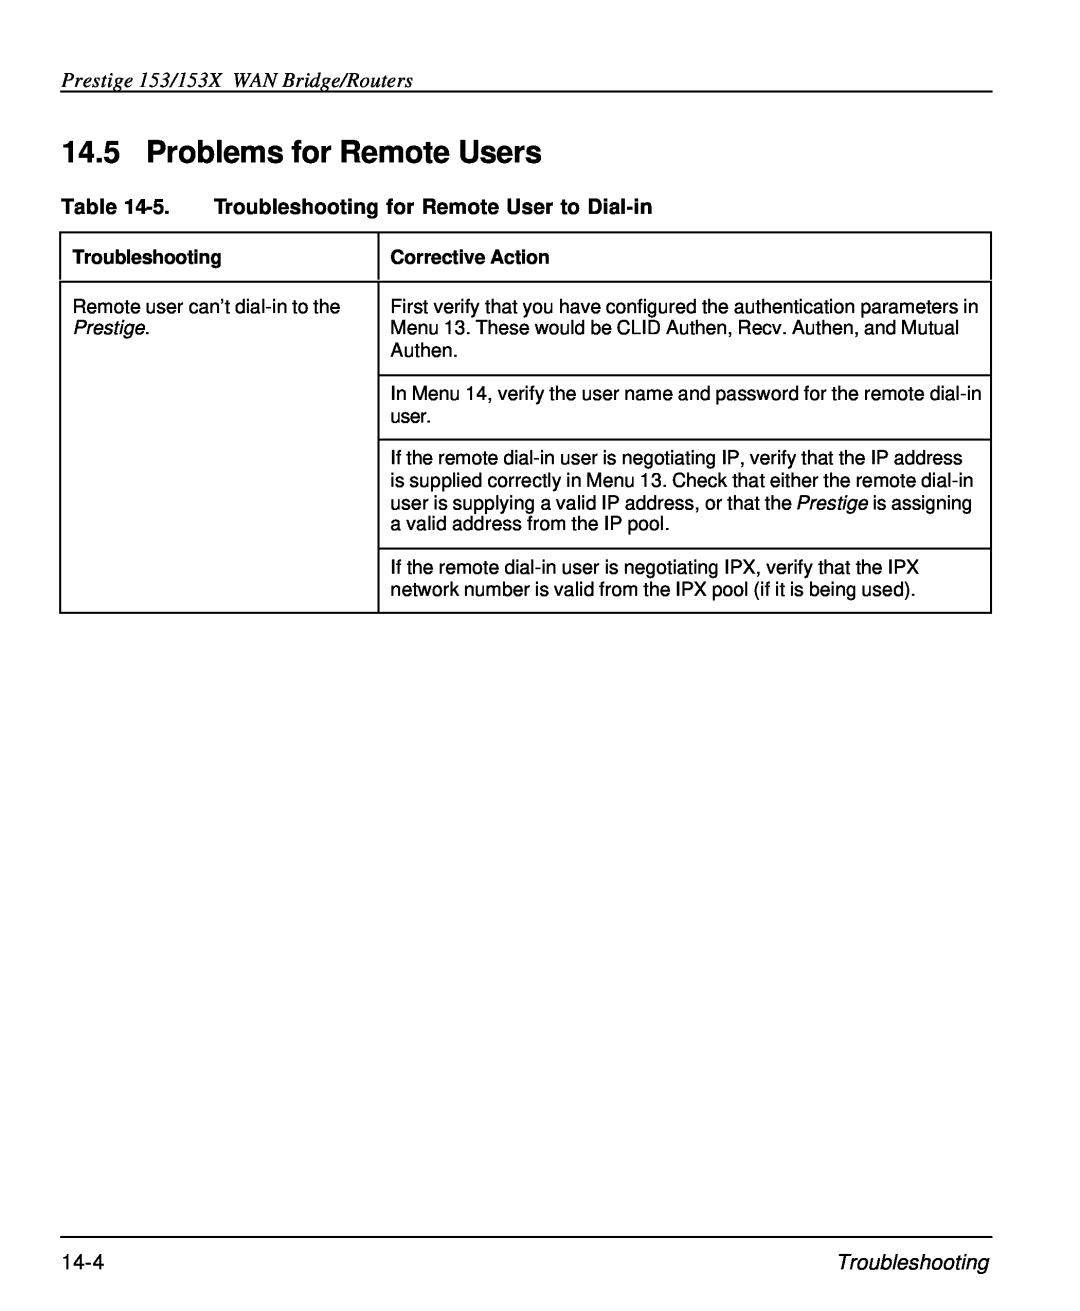 ZyXEL Communications user manual Problems for Remote Users, Prestige 153/153X WAN Bridge/Routers, Troubleshooting 